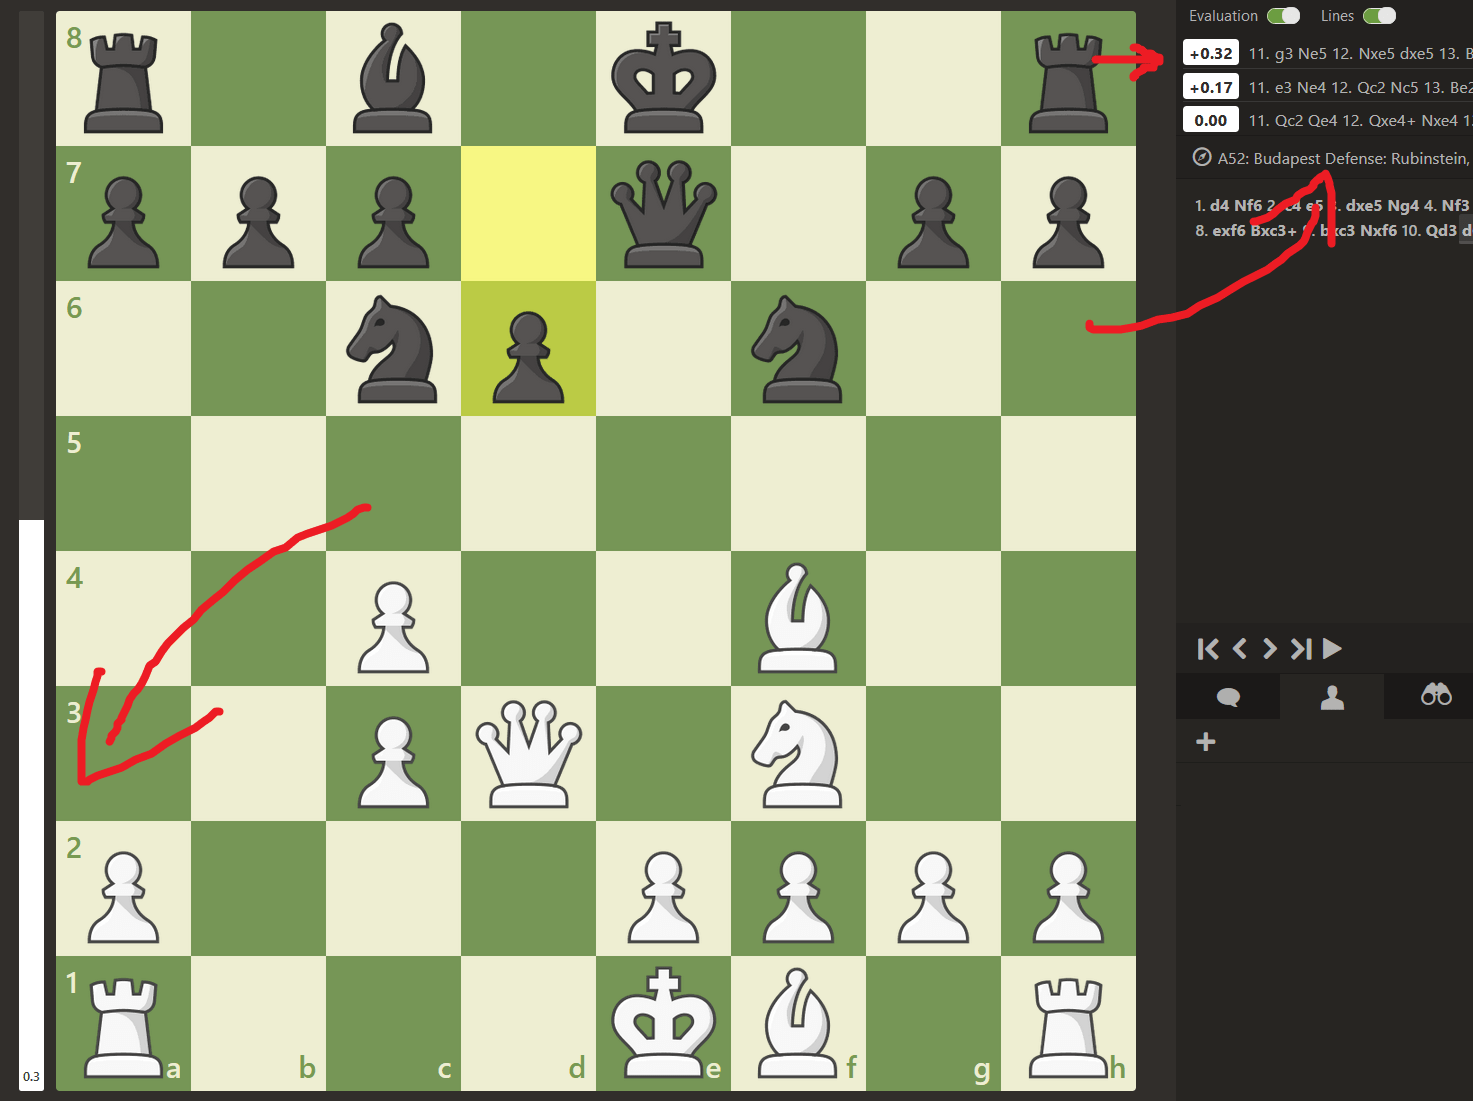 Did a self-analysis on a game with a of chess.com's bots. And Stockfish is  trying to cheat! : r/chess